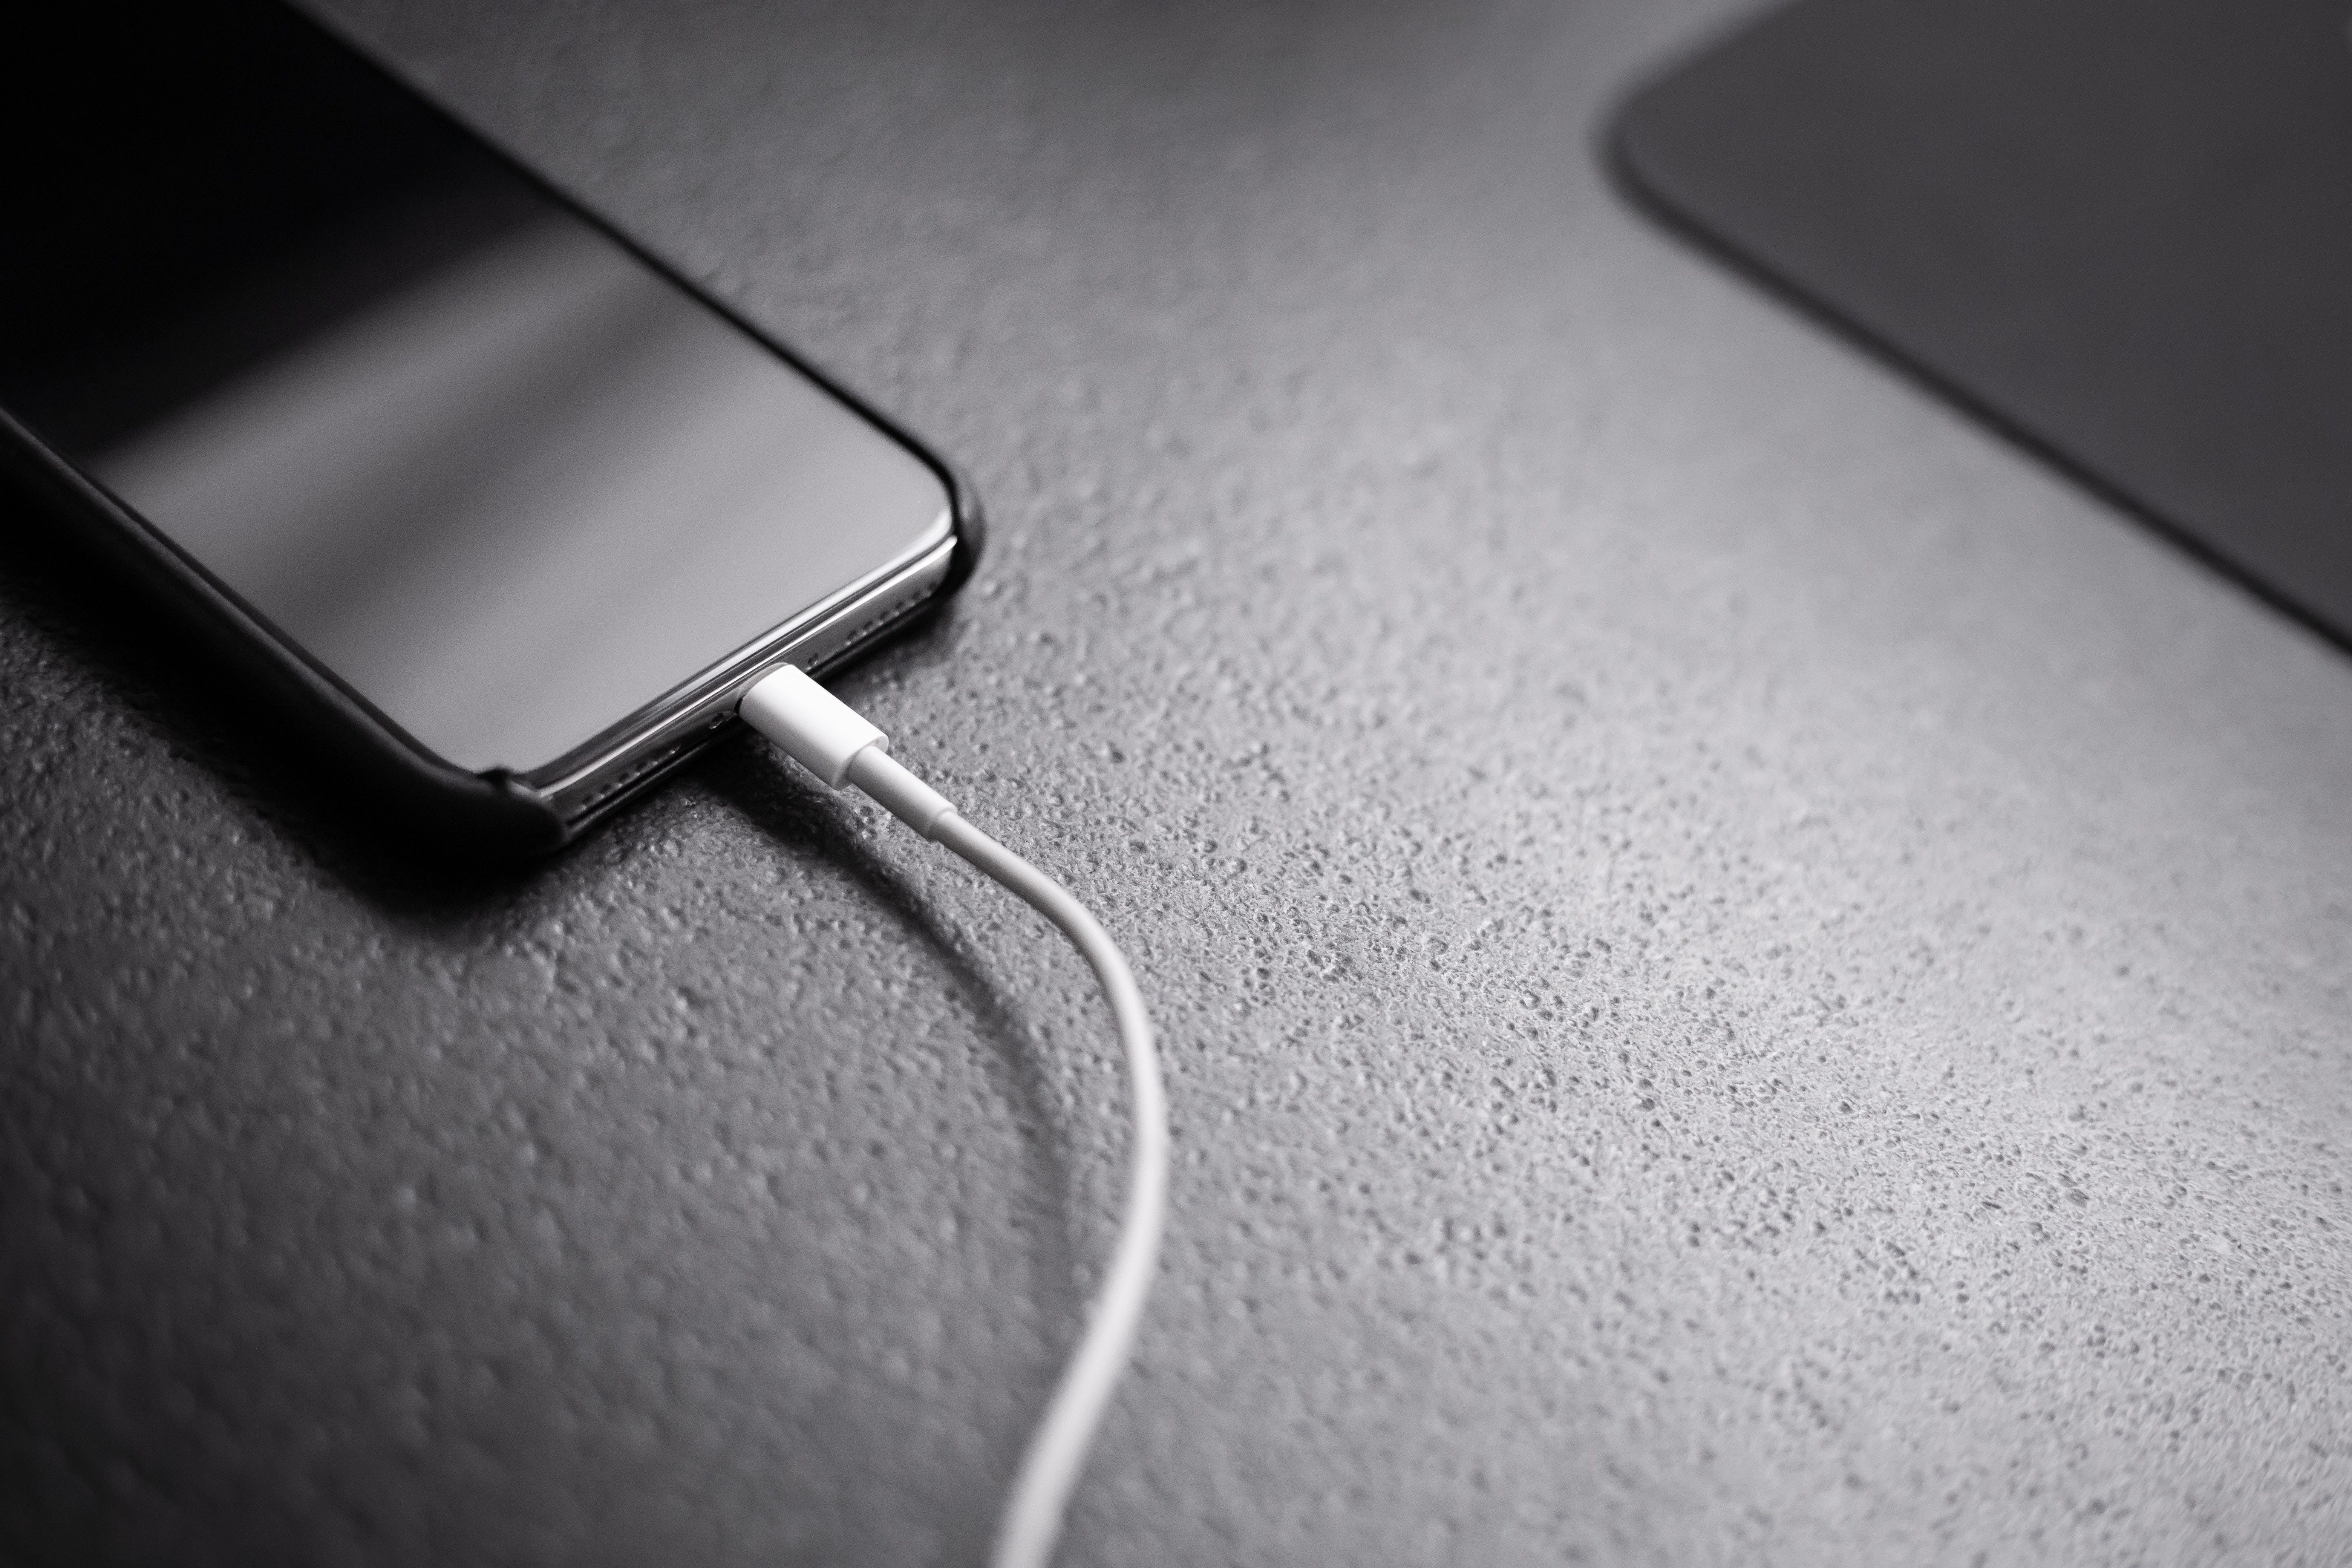 Apple Could Ditch Lightning Ports For USB-C In iPhone Next Year